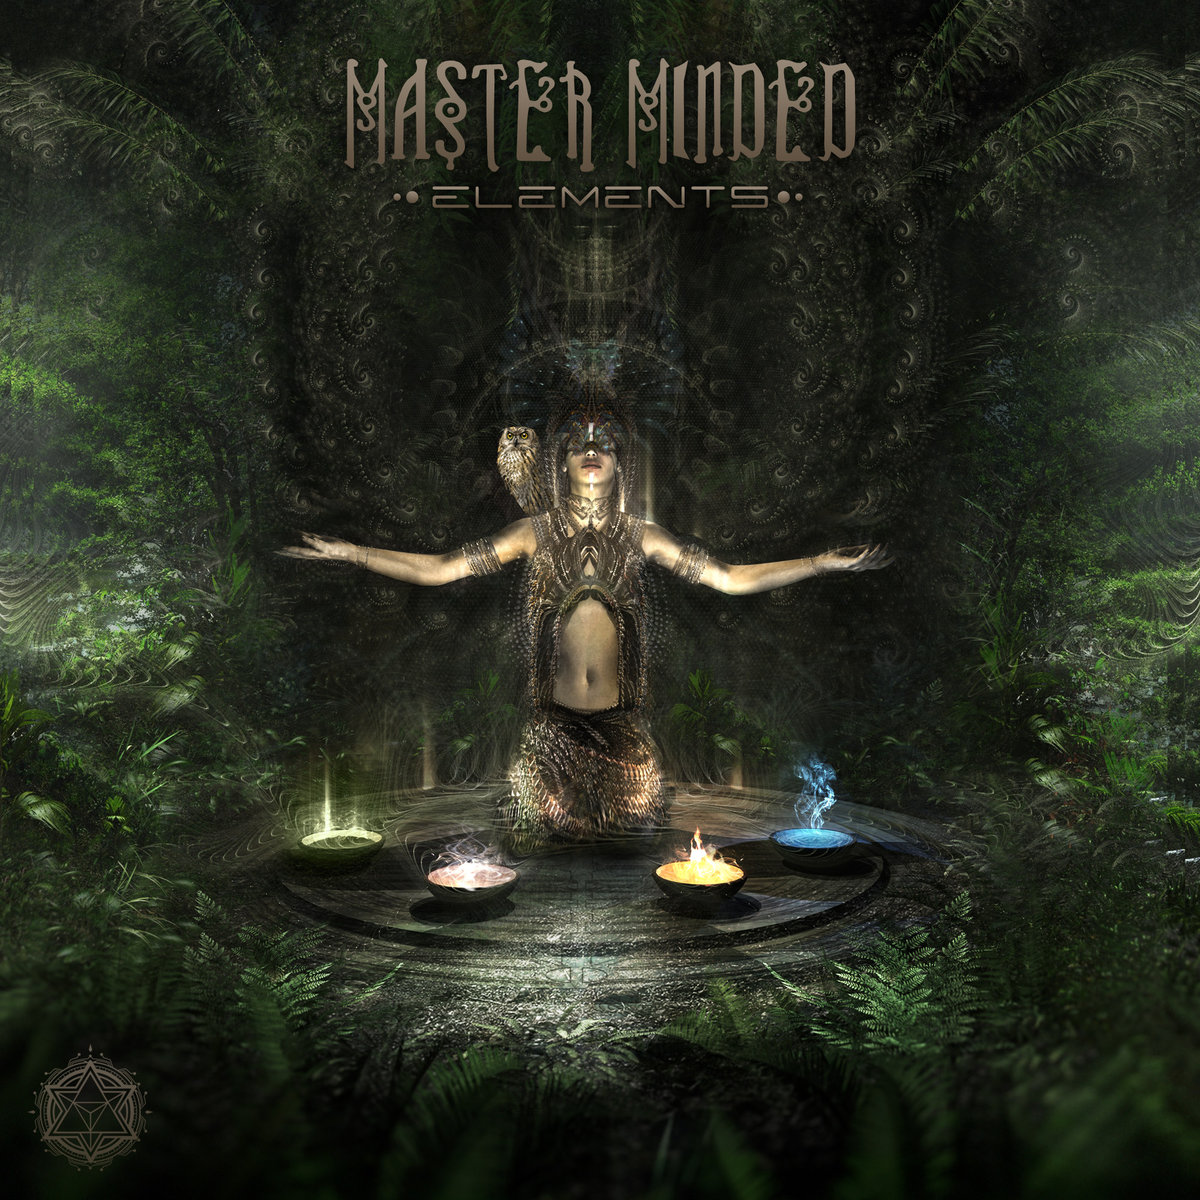 Master Minded - Water - Liquid Dancing (Gaya continued) @ 'Elements' album (432hz, electronic)